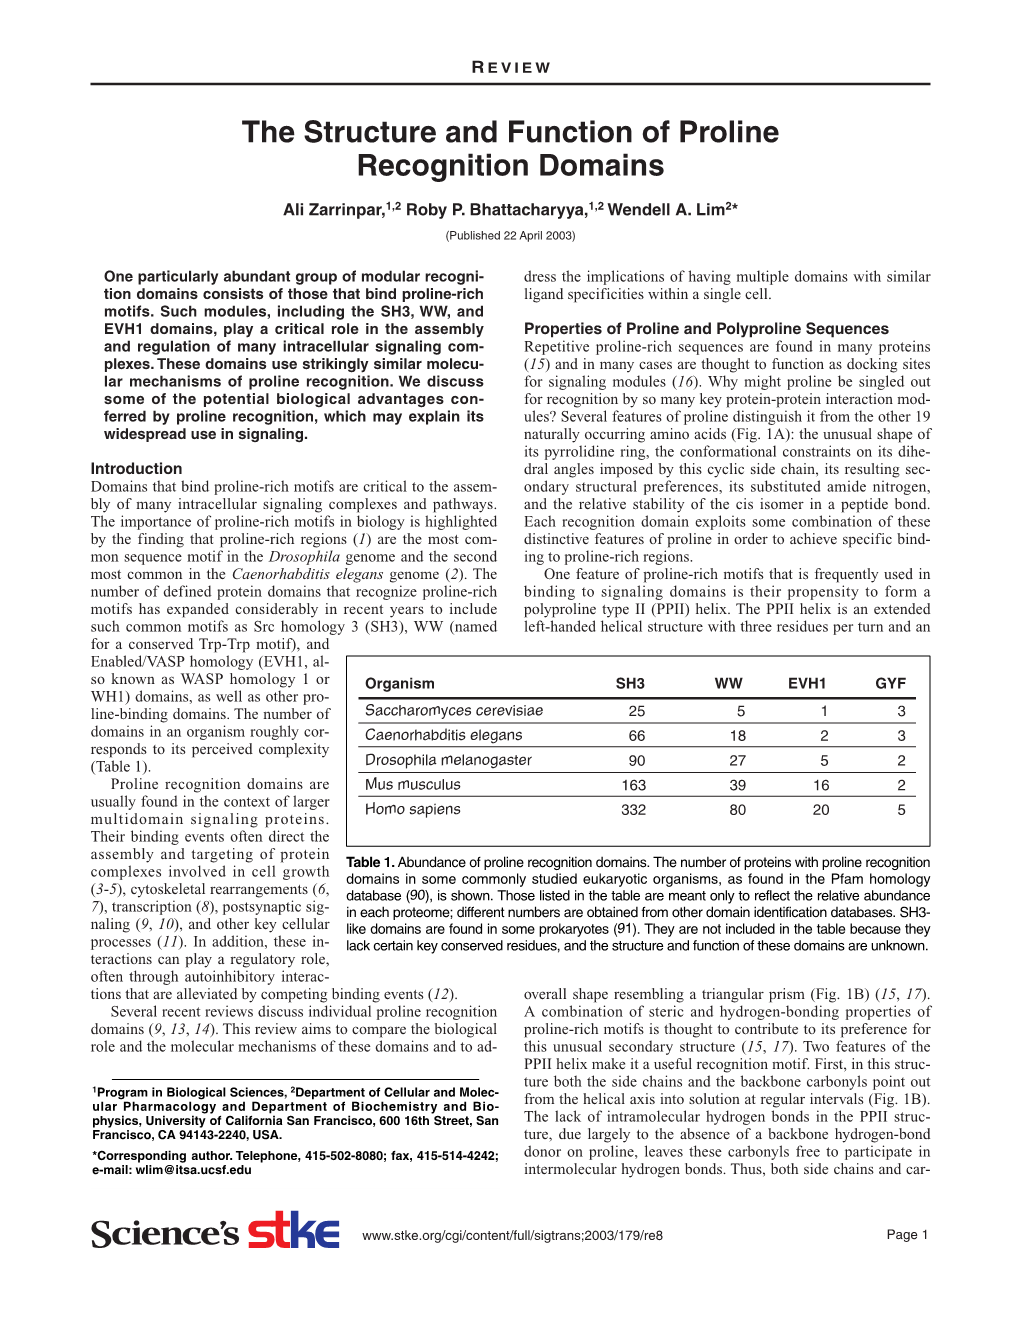 The Structure and Function of Proline Recognition Domains